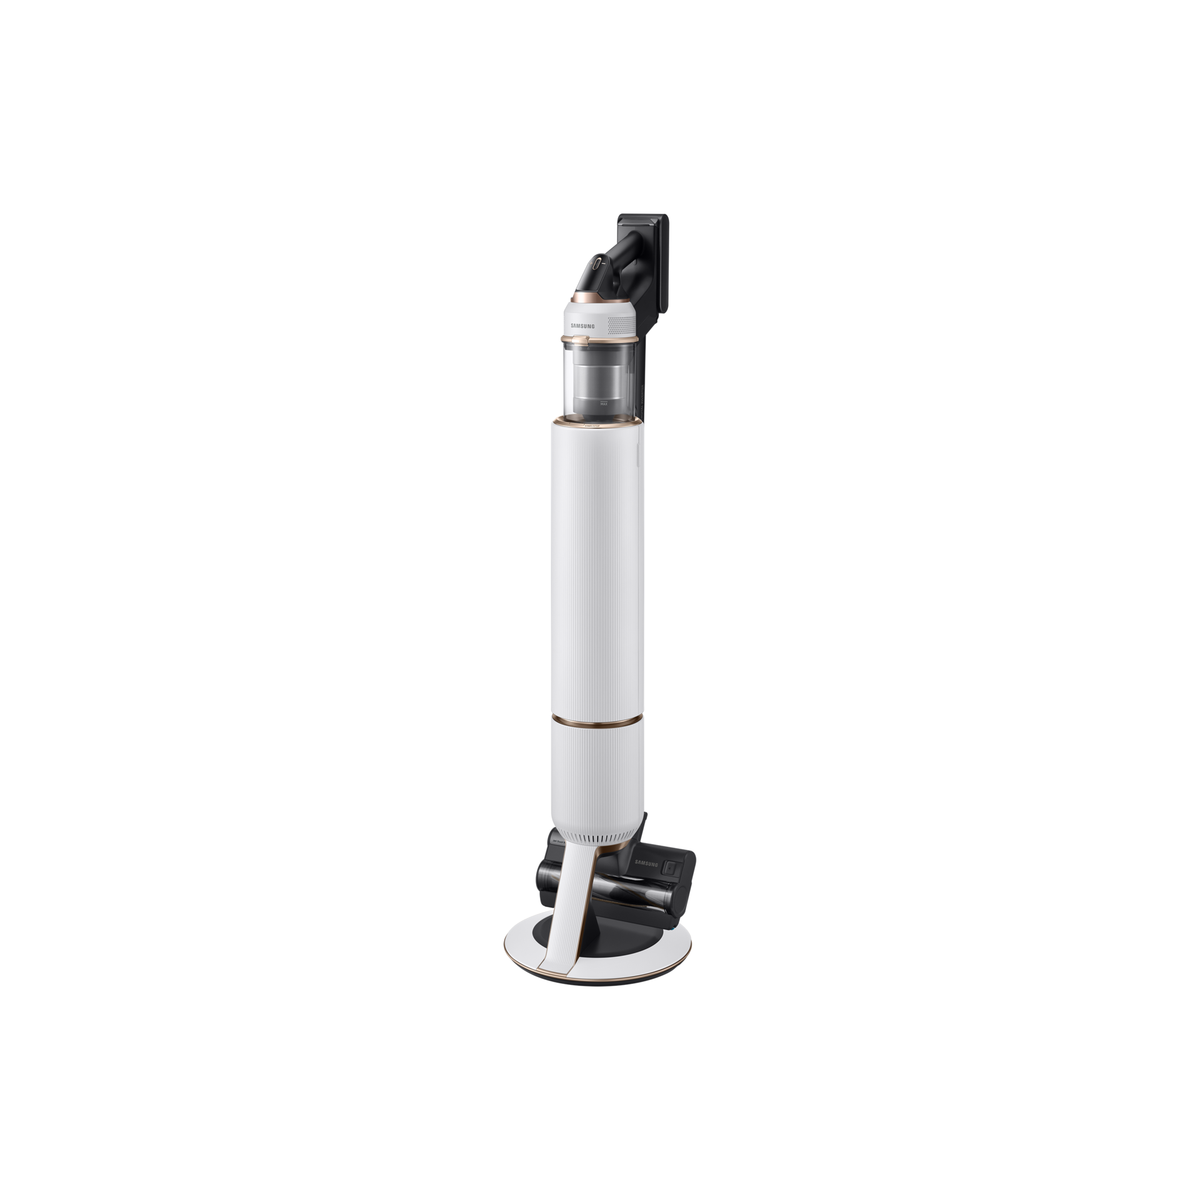 Samsung Bespoke Jet Plus Pet Cordless Stick Vacuum Cleaner - White | VS20B95823W/E from Samsung - DID Electrical